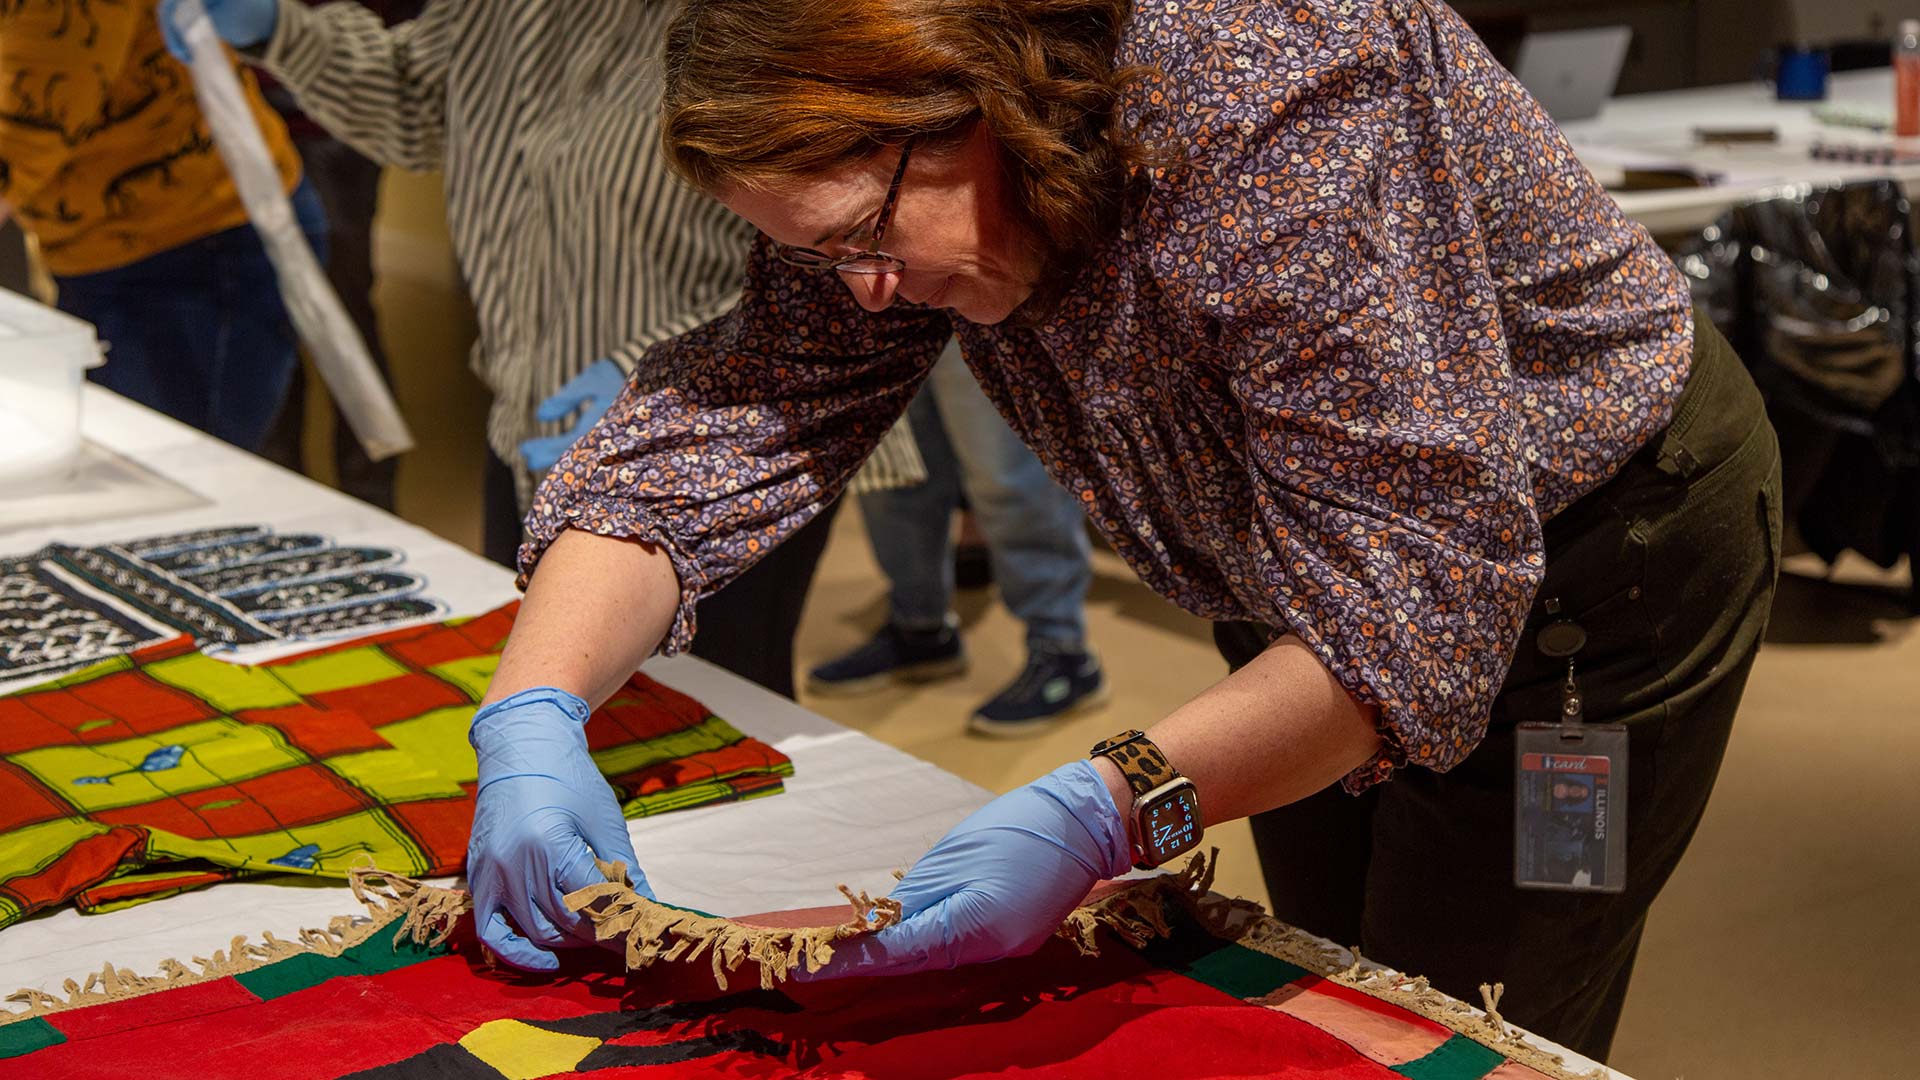 a woman carefully investigate the underside of a red textile during an artifact review